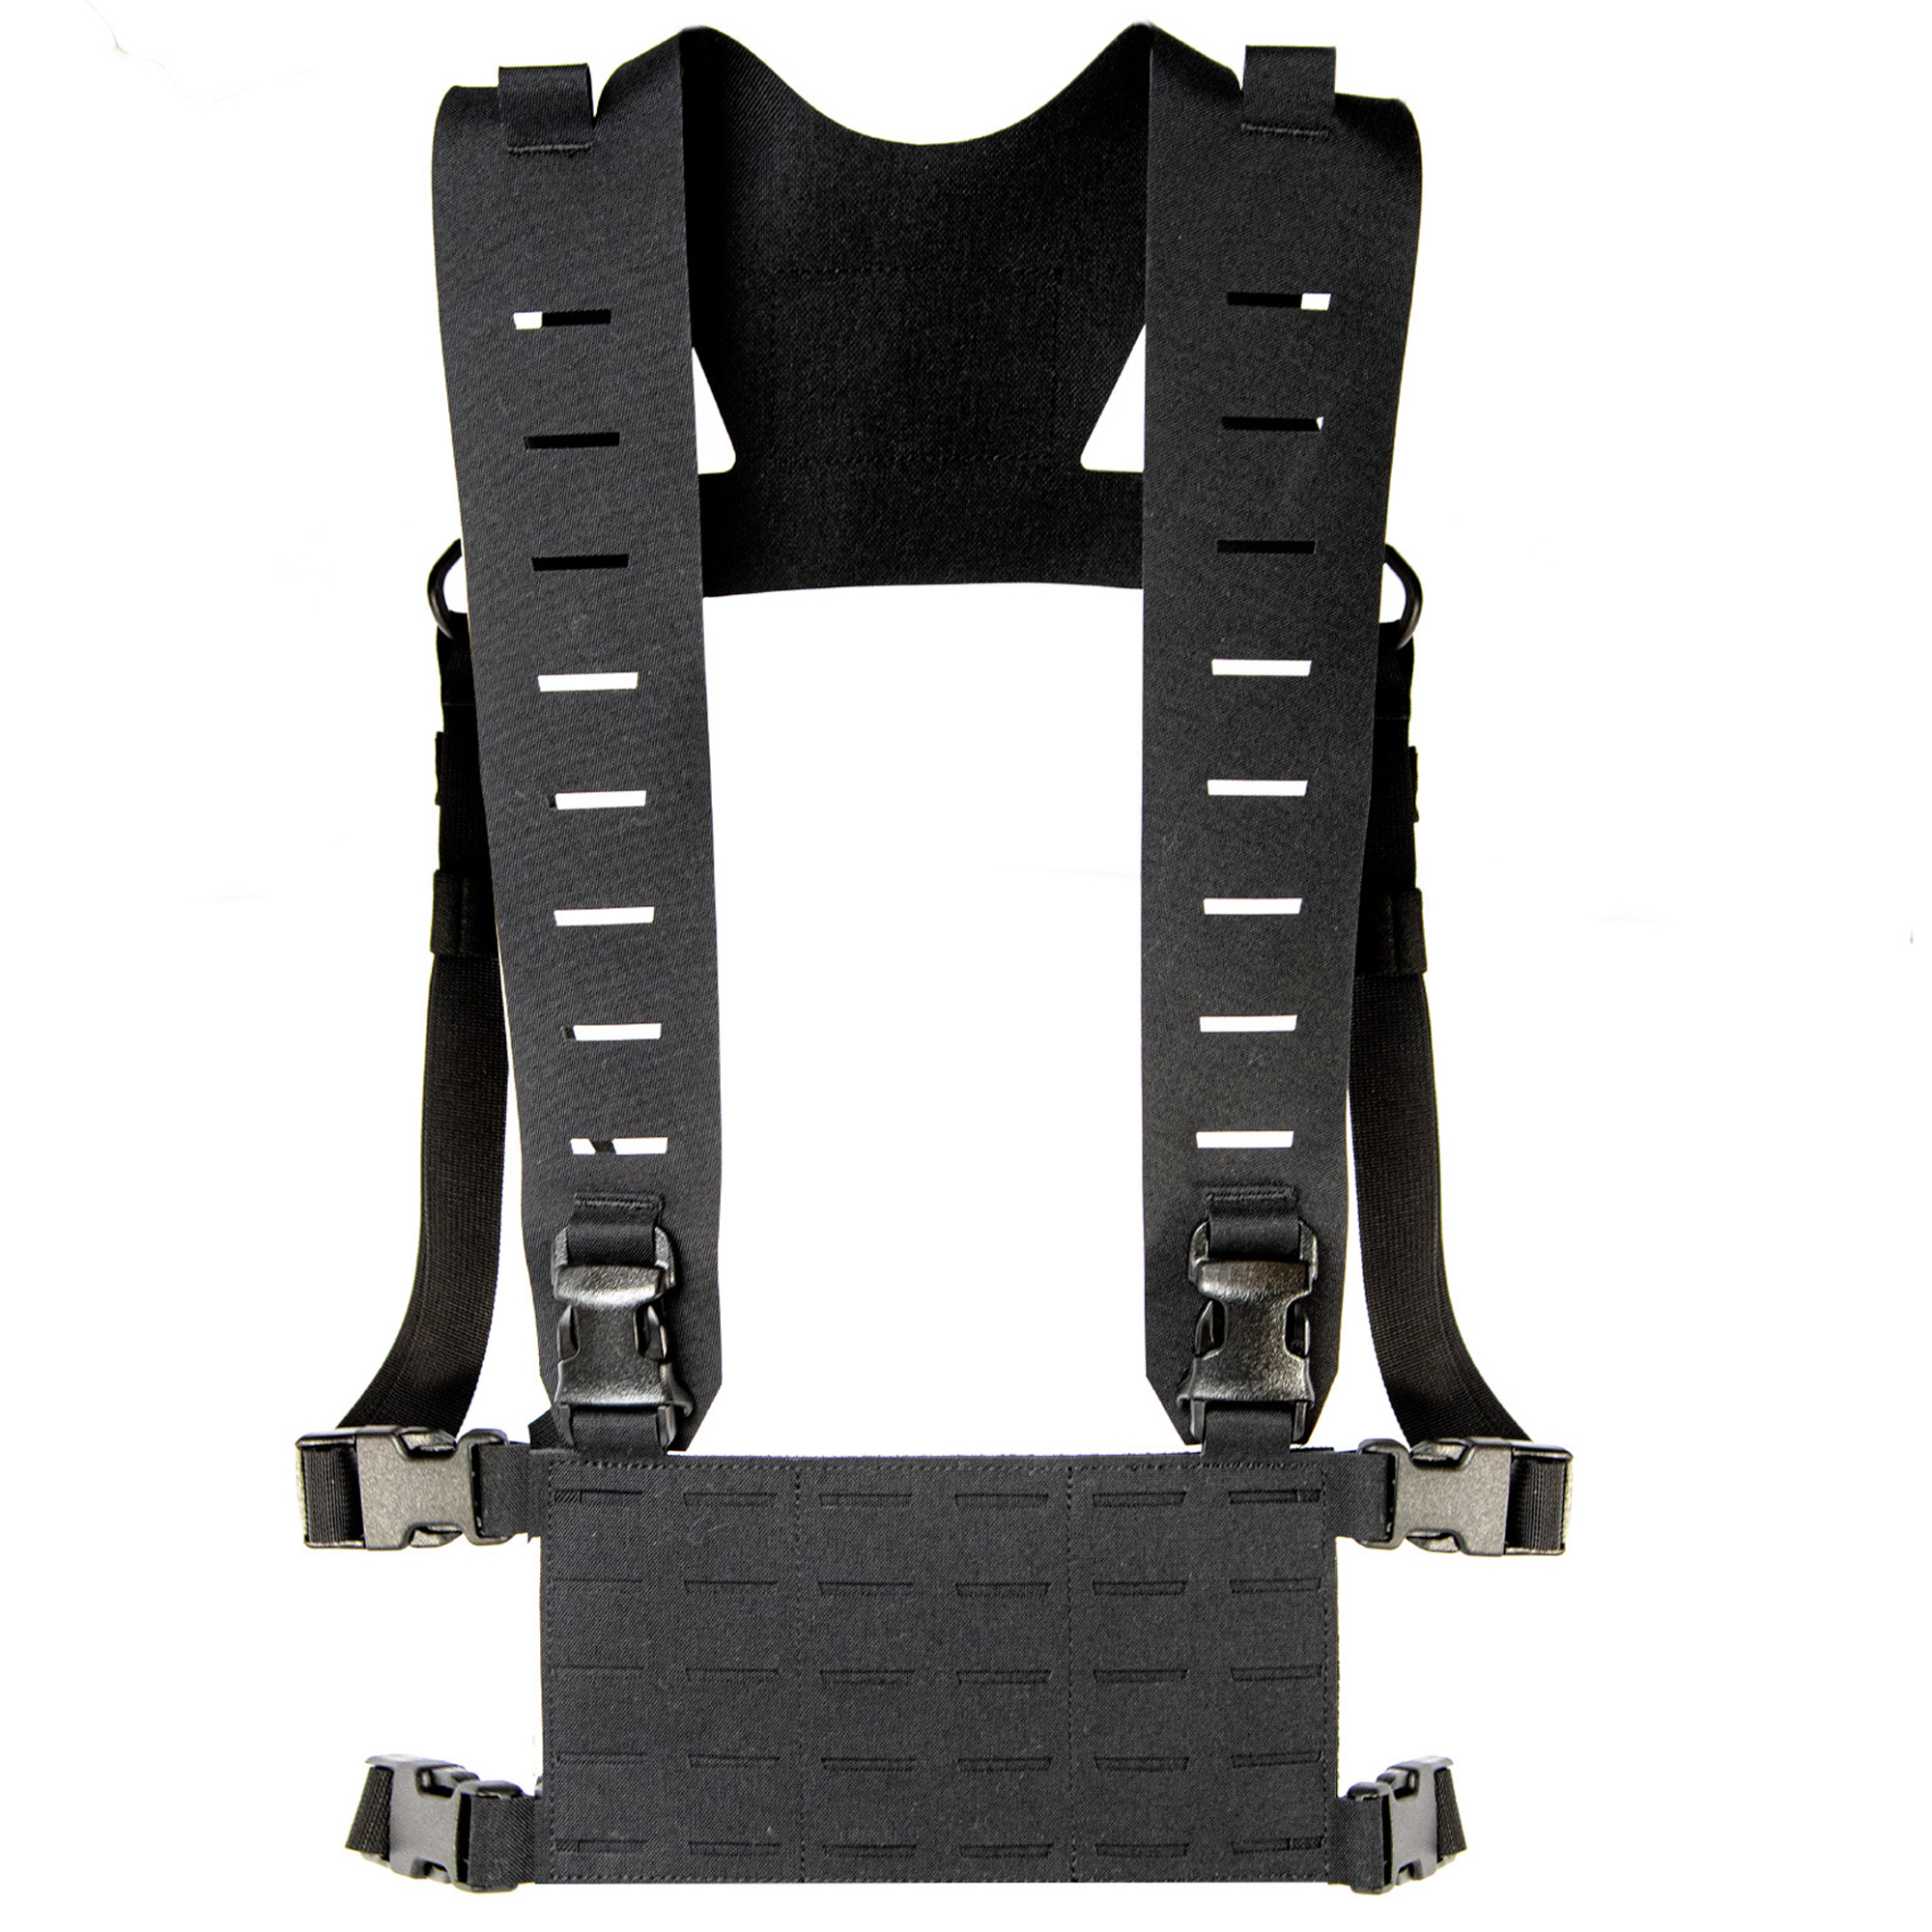 Buy Foundation Series Chest Rig (Harness Only) And More | Blackhawk